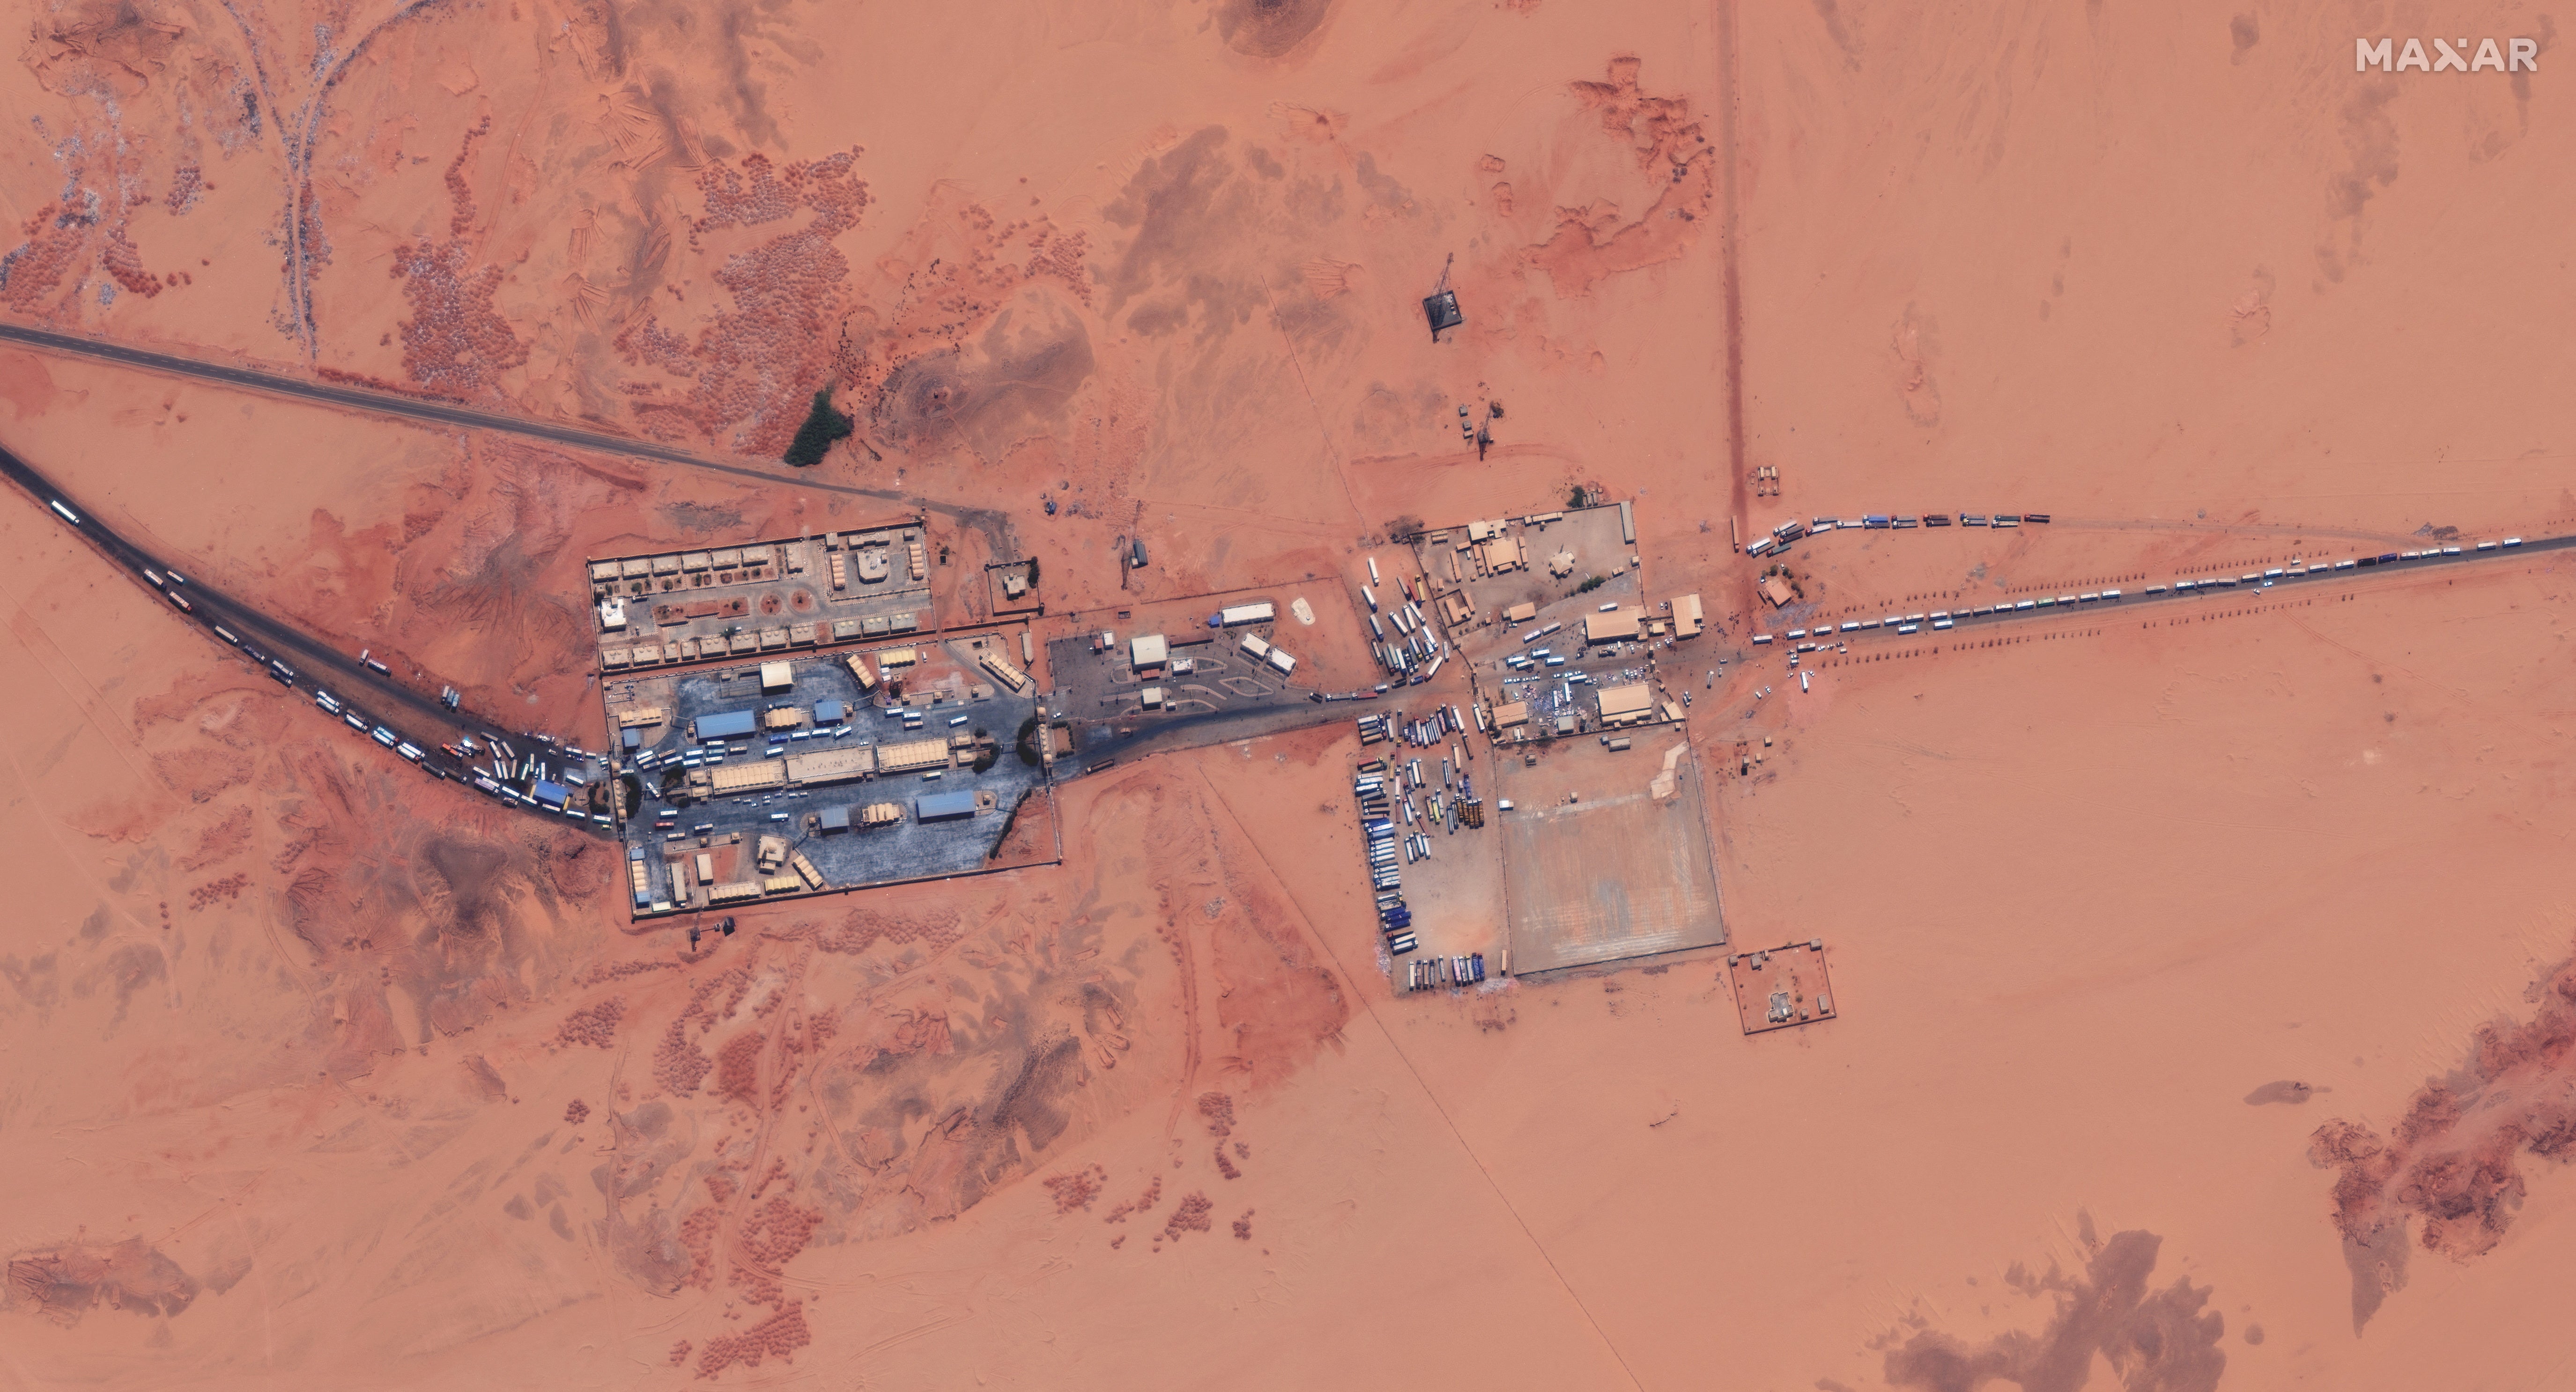 A satellite overview of the Eastern border post highway A1 between Egypt and Sudan